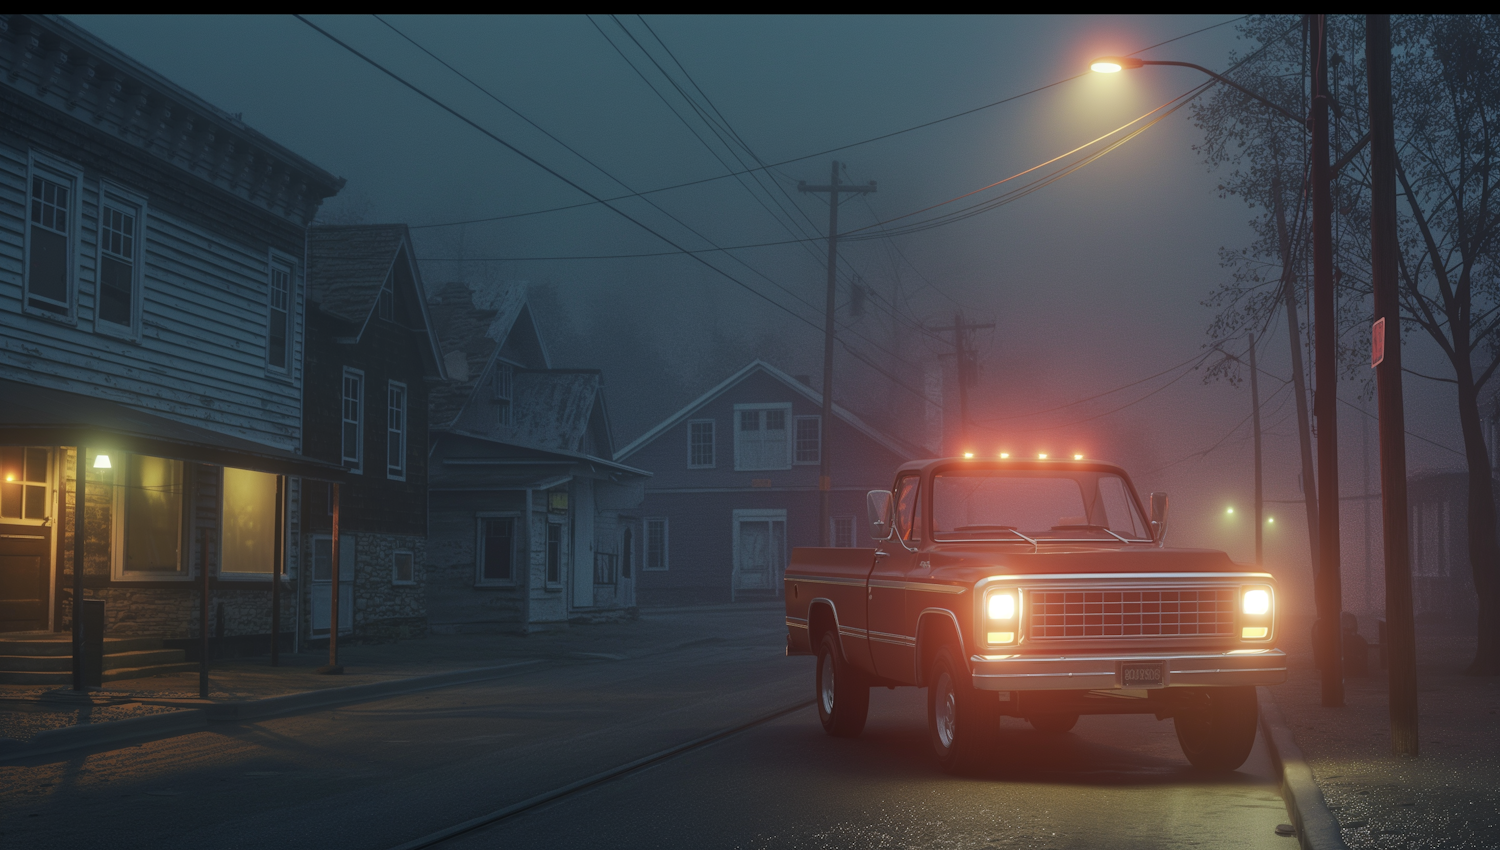 Nocturnal Street Scene with Vintage Pickup